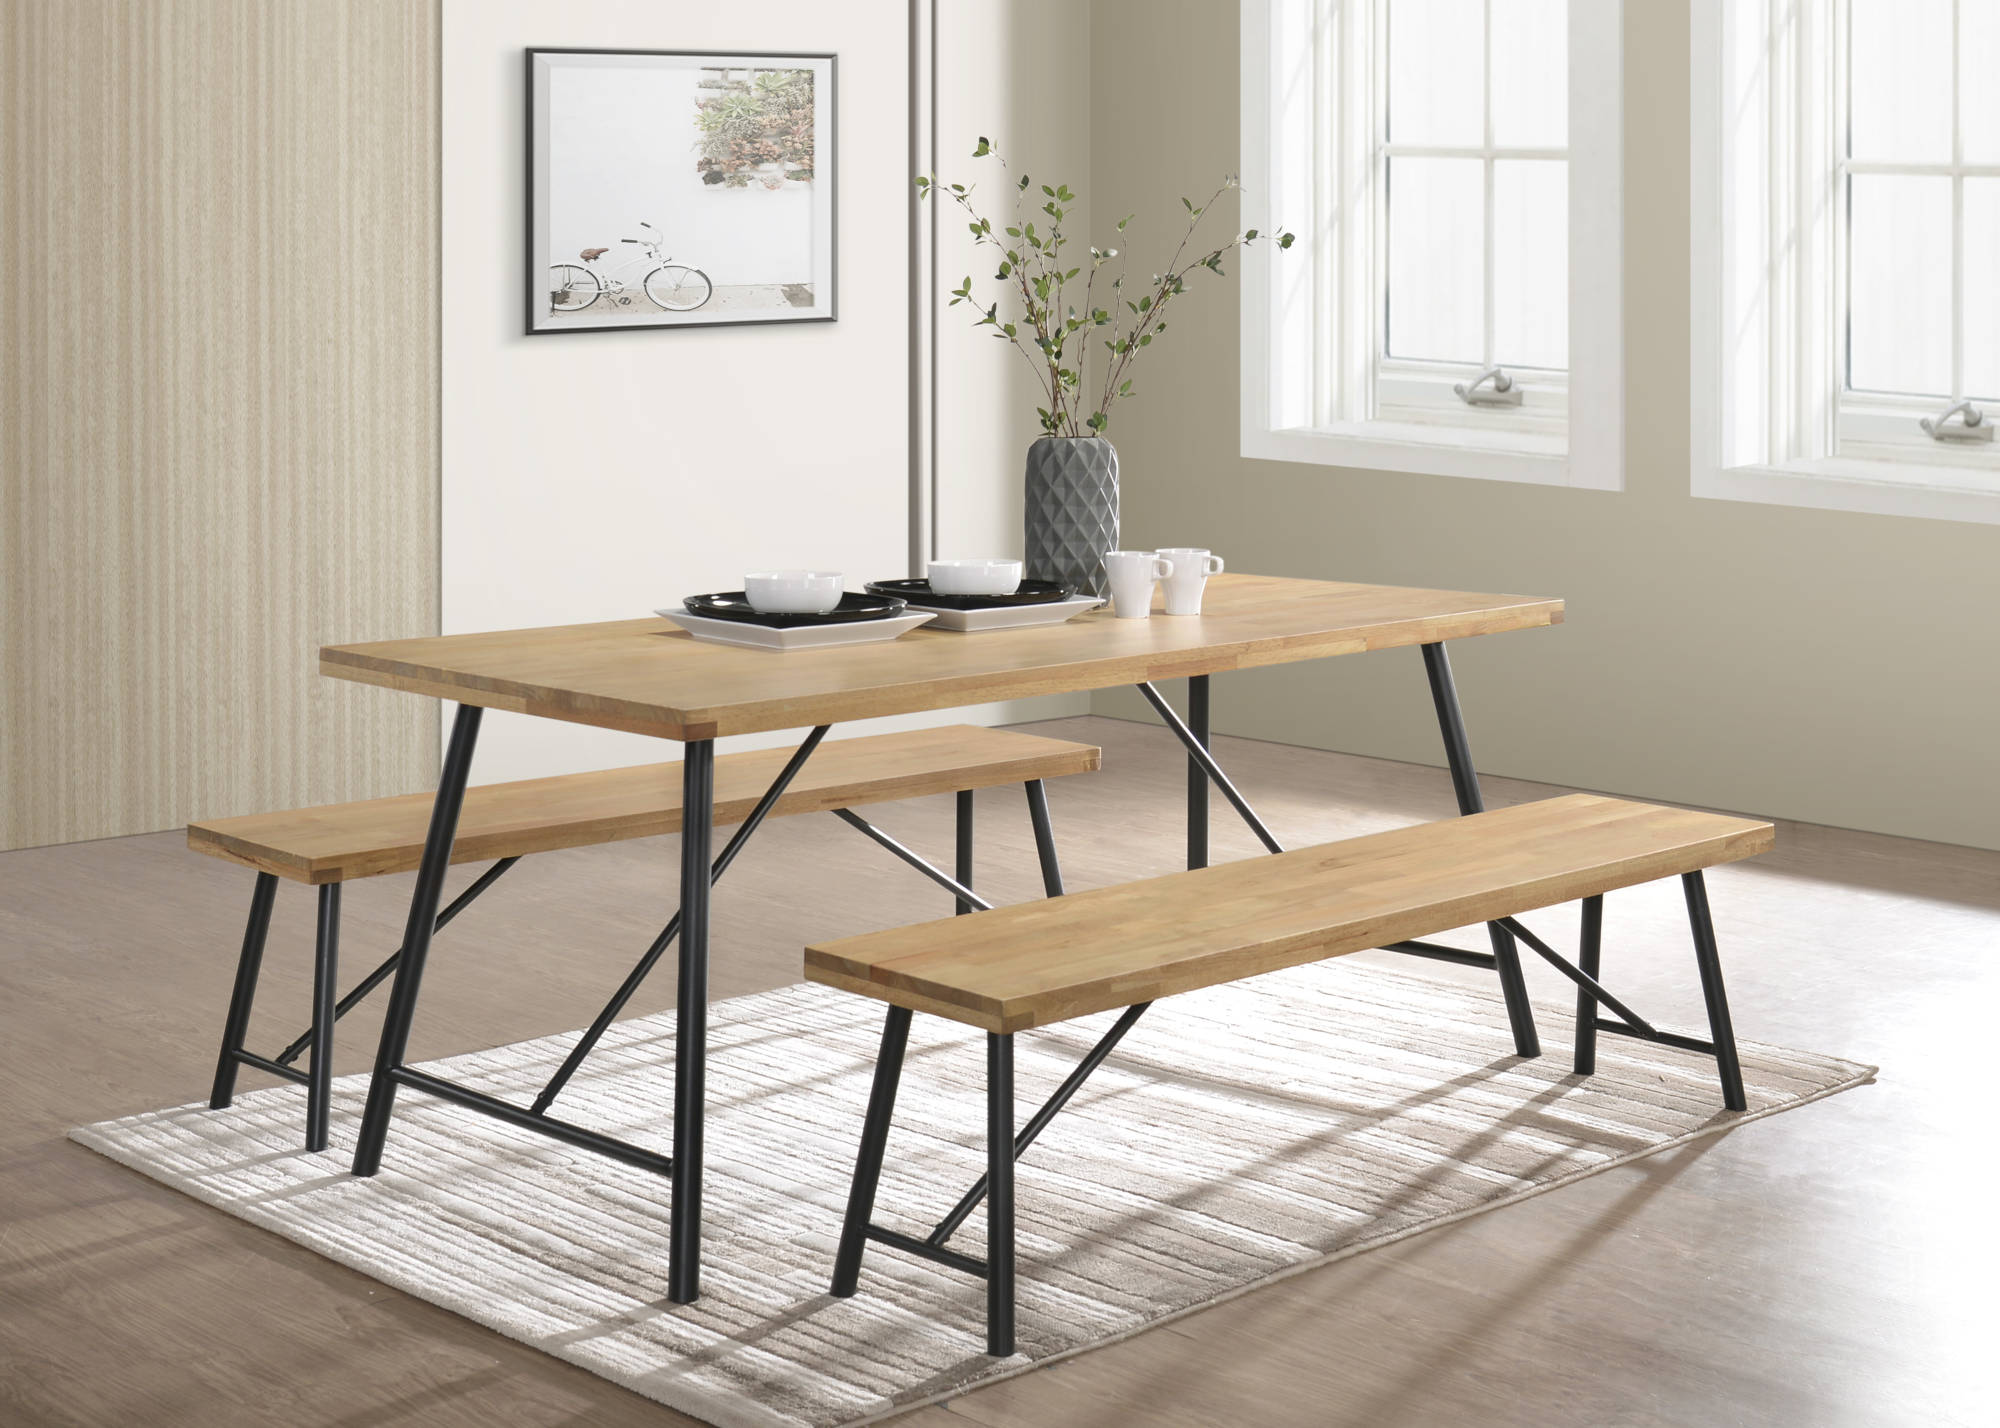 1.6m Owen Dining Table Set - 1 Dining Table + 2 Benches